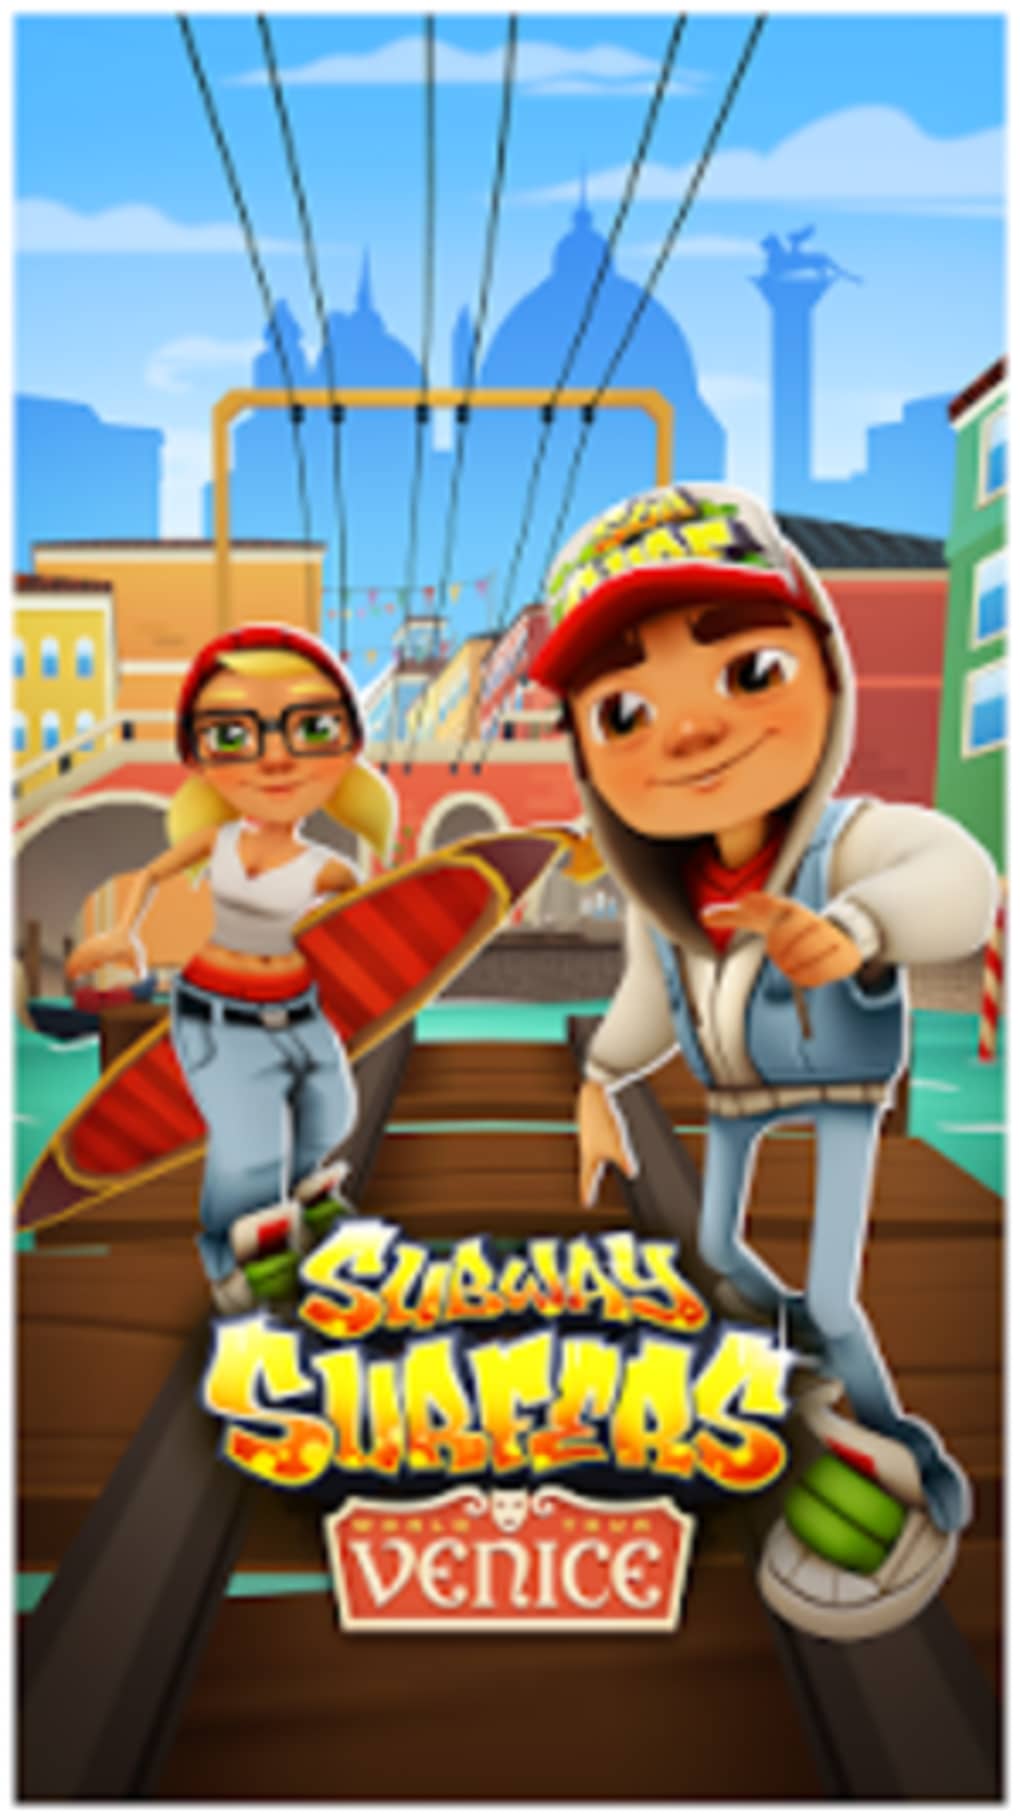 Subway surfers pc download free